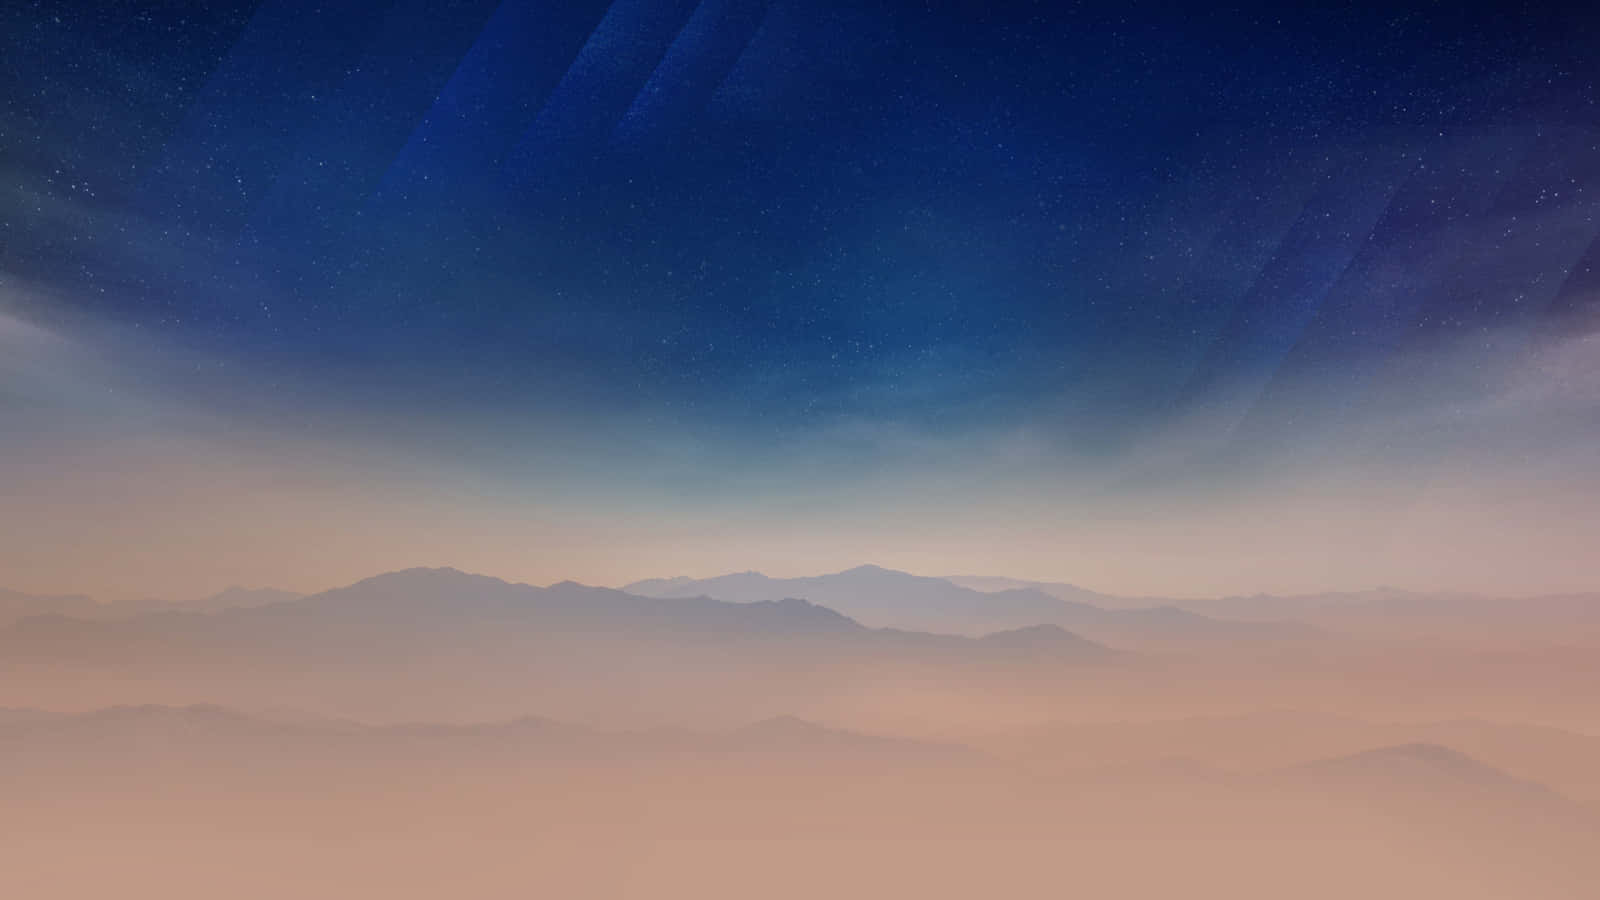 Samsung Dex With Foggy Mountains Wallpaper